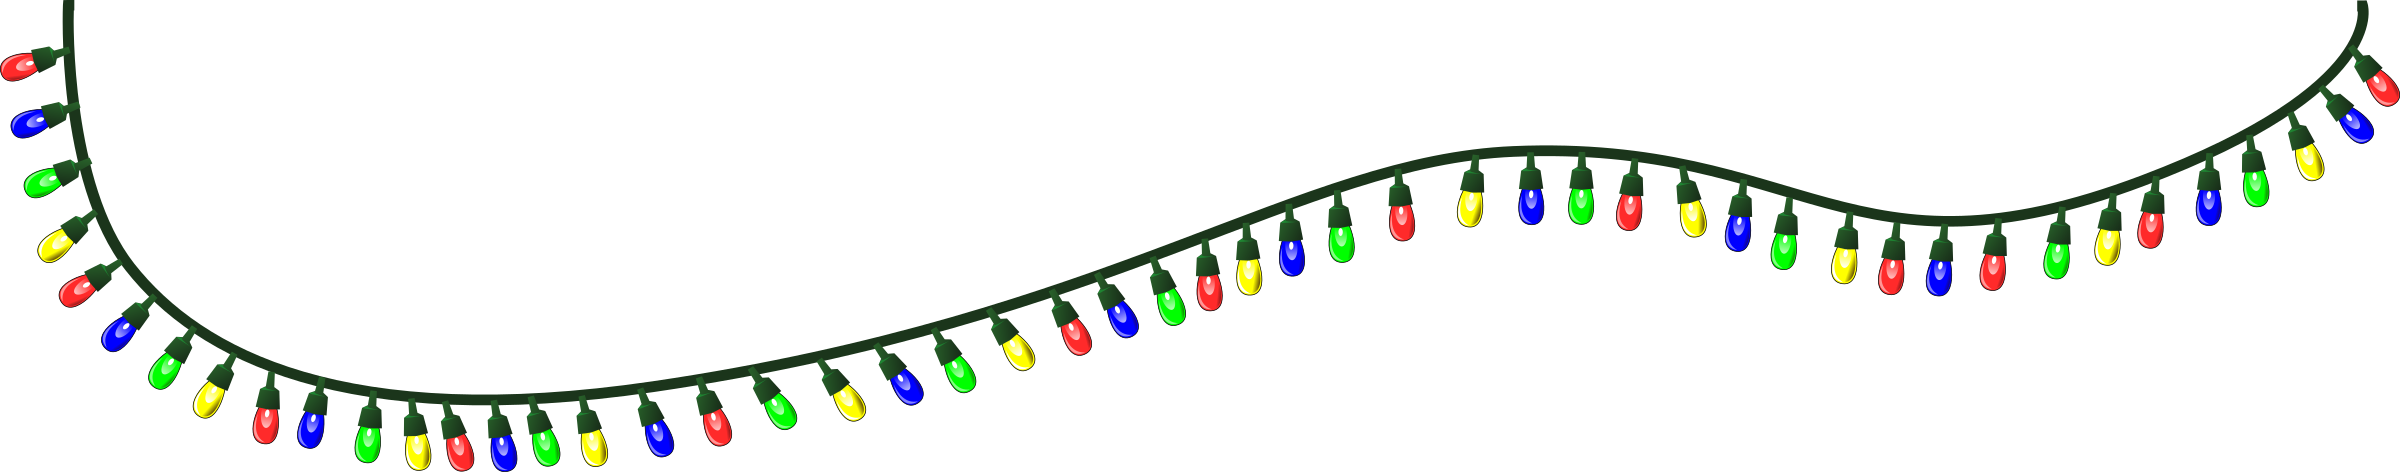 Free Christmas Lights Clipart Picture